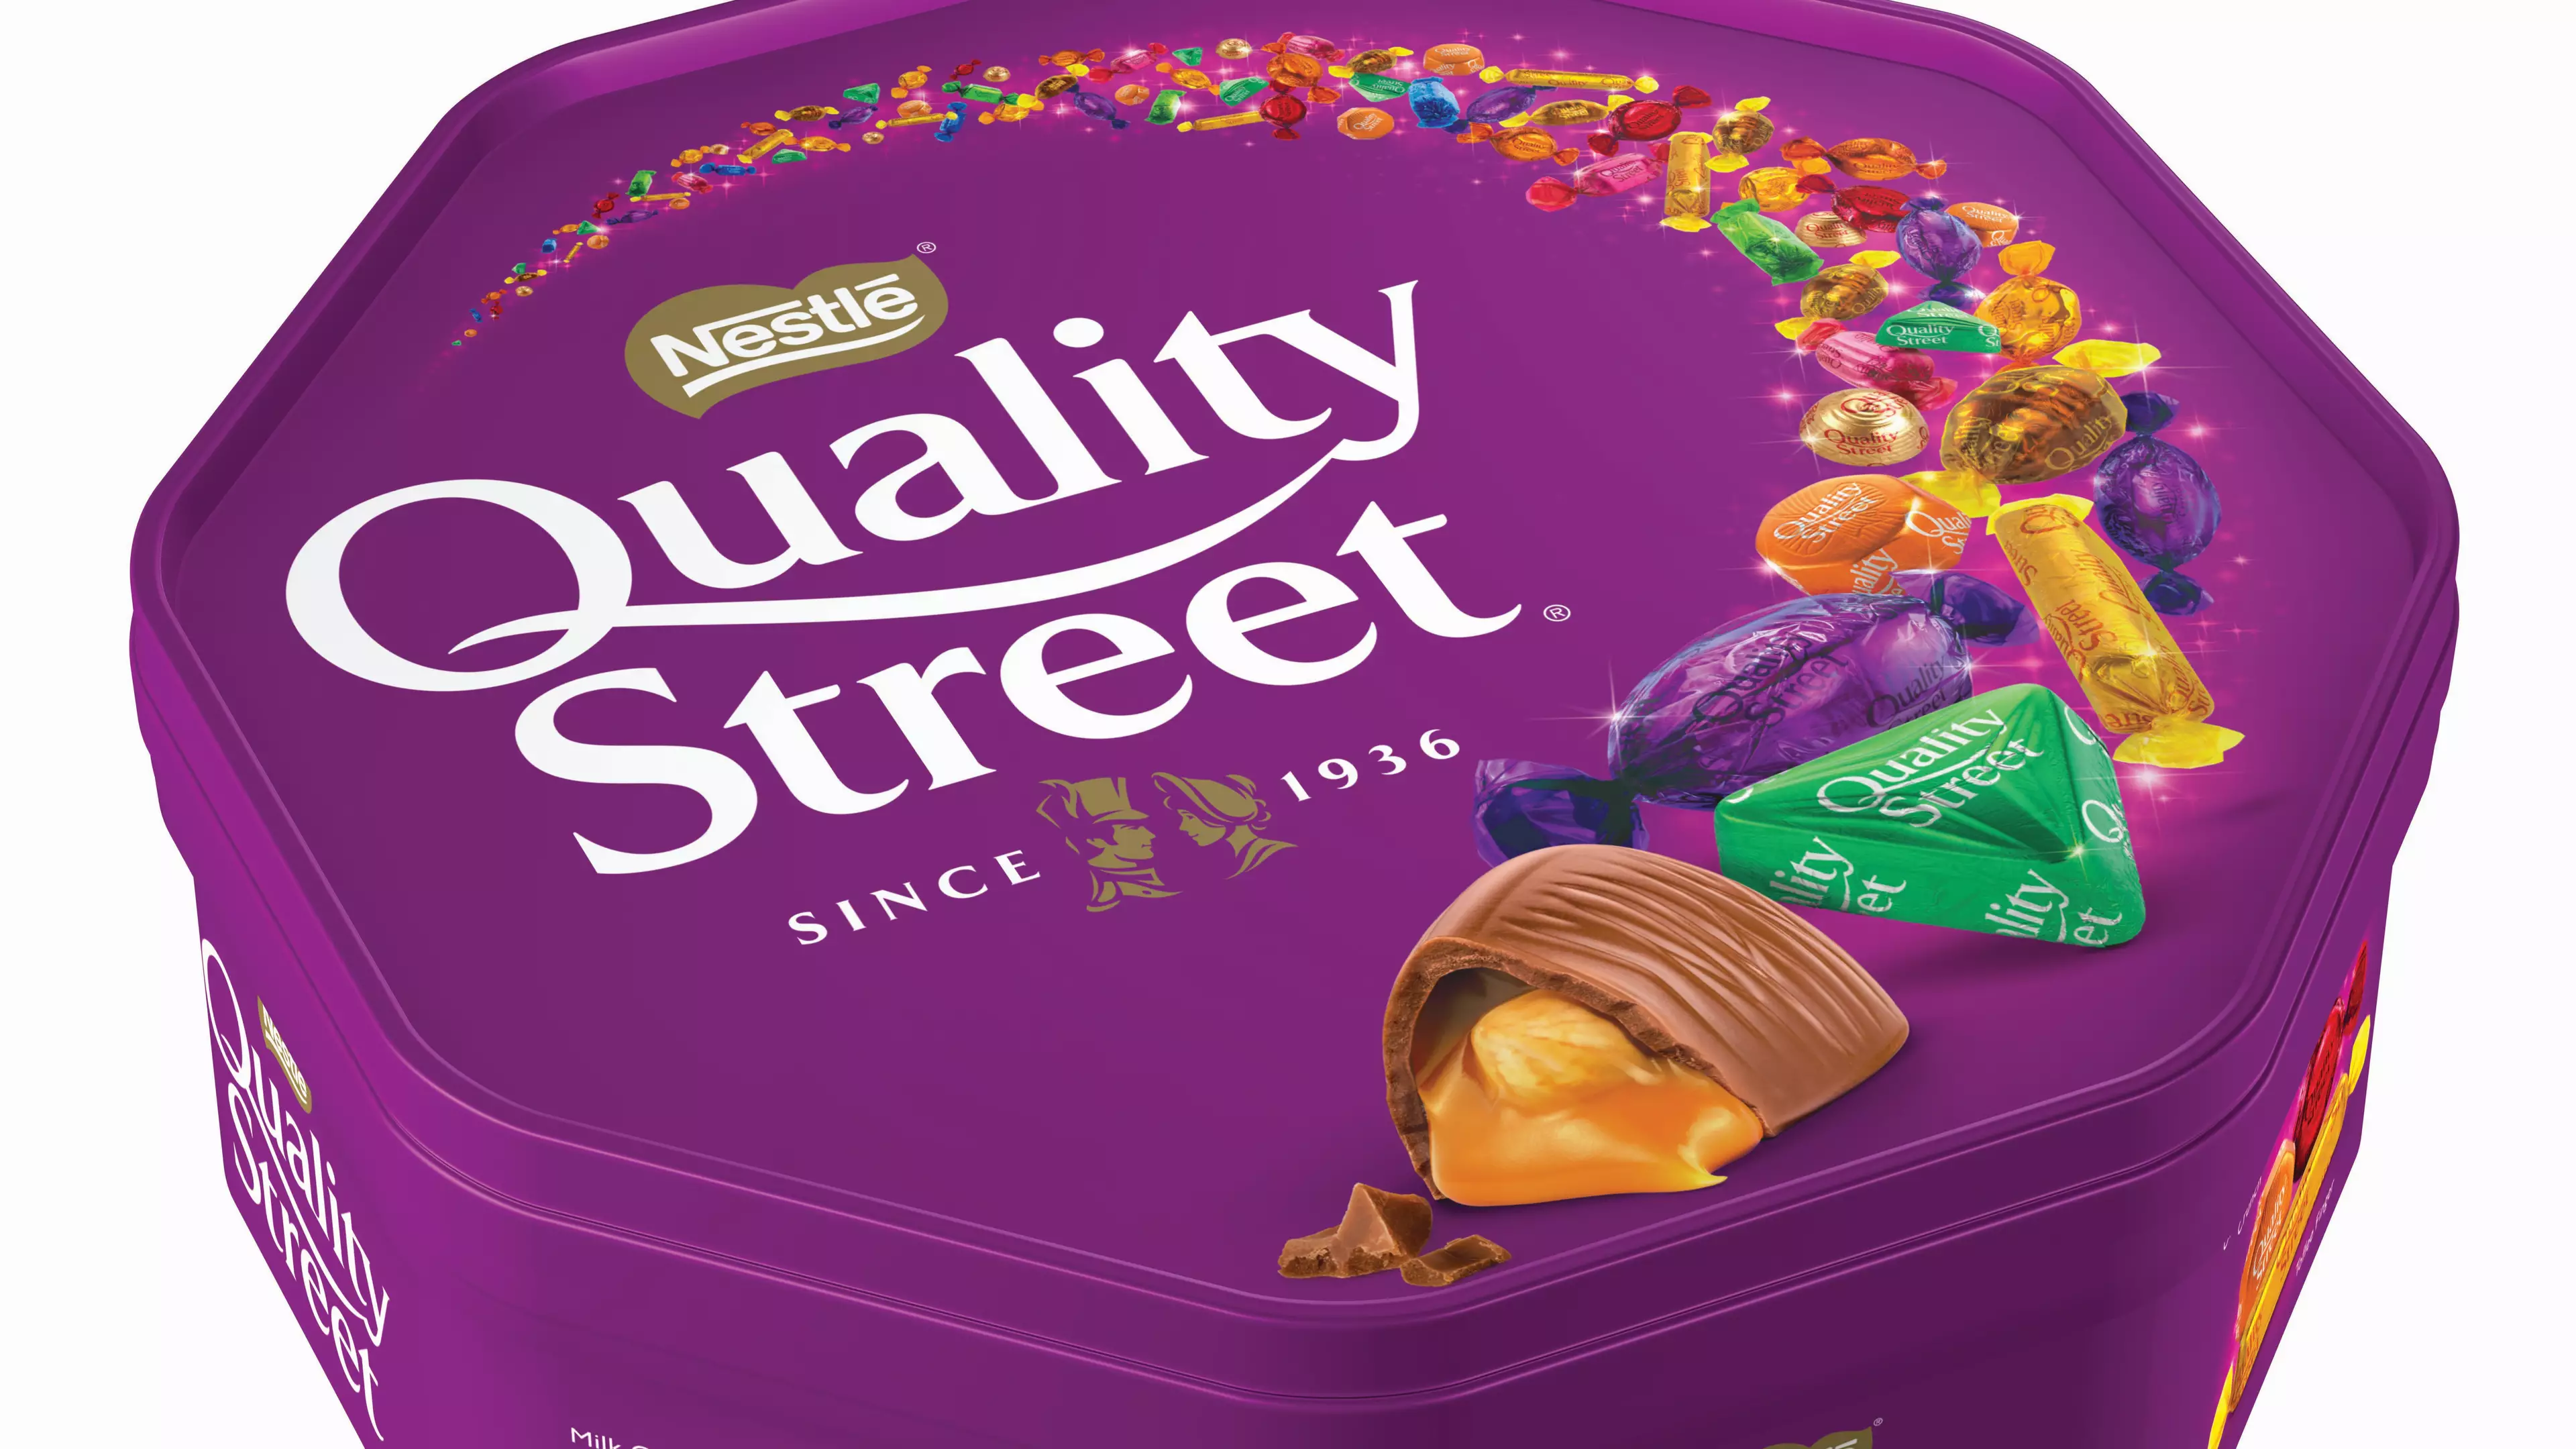 Boxes of Quality Street have been reduced by 30g.